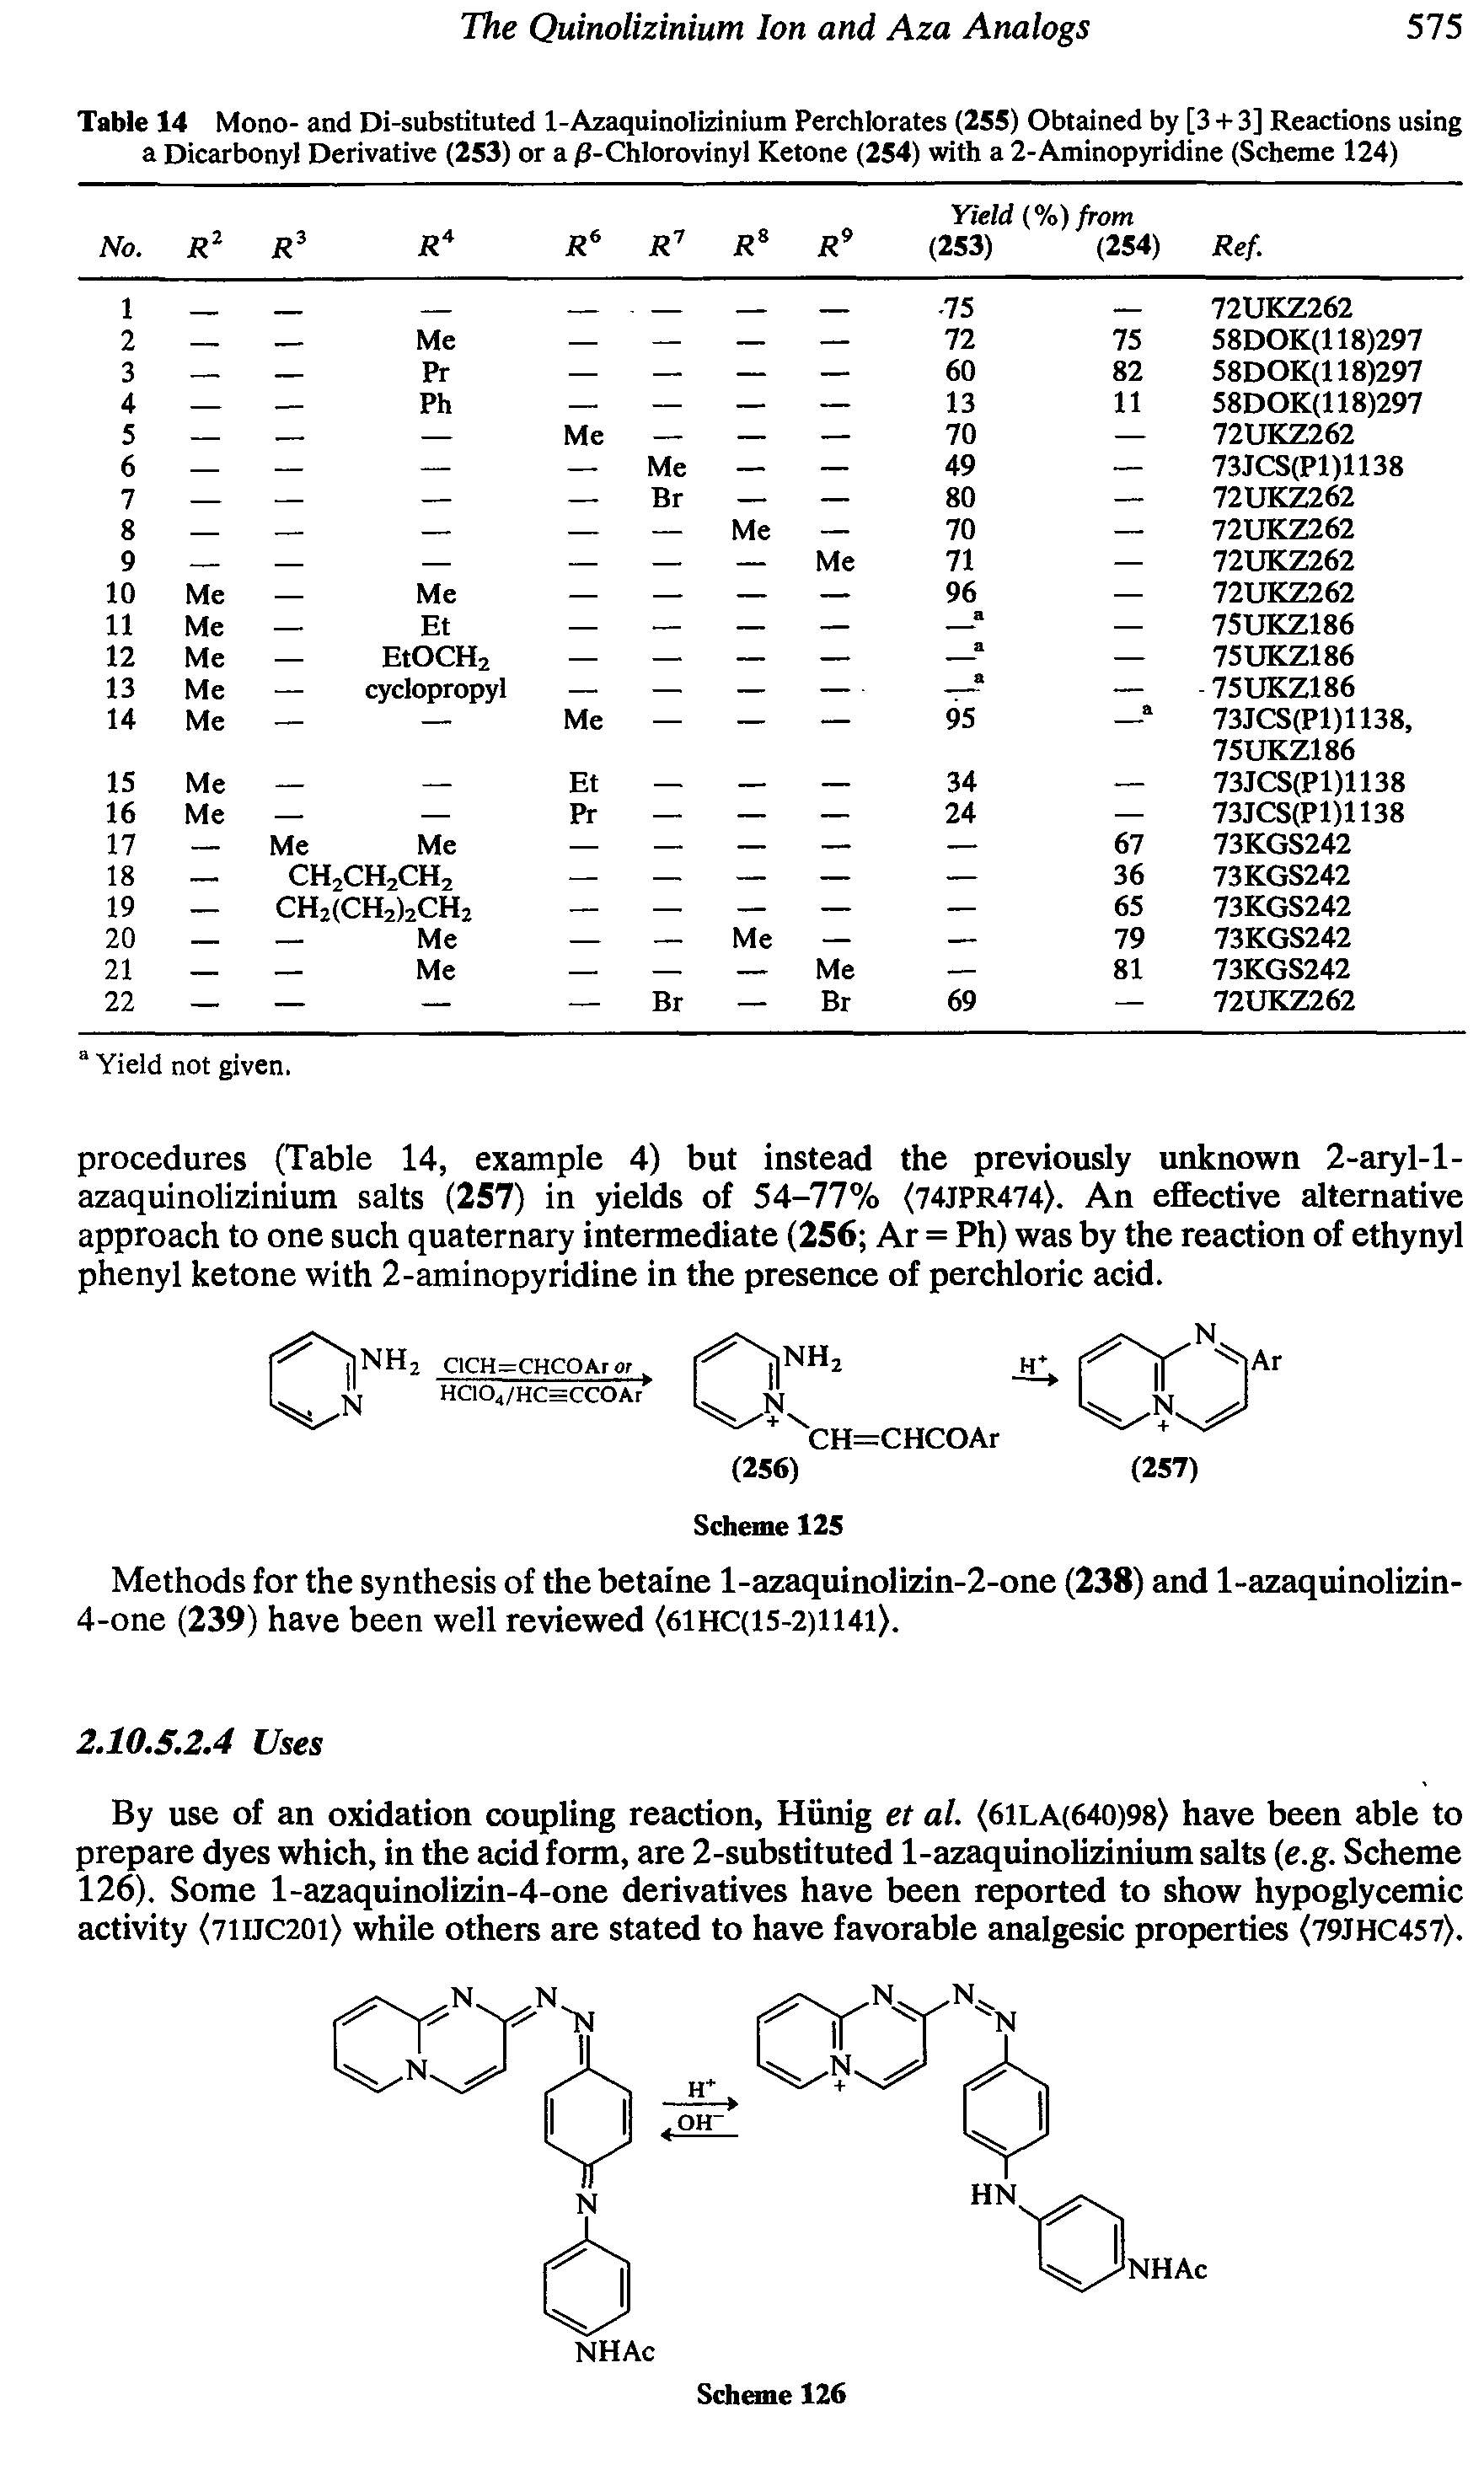 Table 14 Mono- and Di-substituted 1-Azaquinolizinium Perchlorates (255) Obtained by [3 + 3] Reactions using a Dicarbonyl Derivative (253) or a /3-Chlorovinyl Ketone (254) with a 2-Aminopyridine (Scheme 124)...